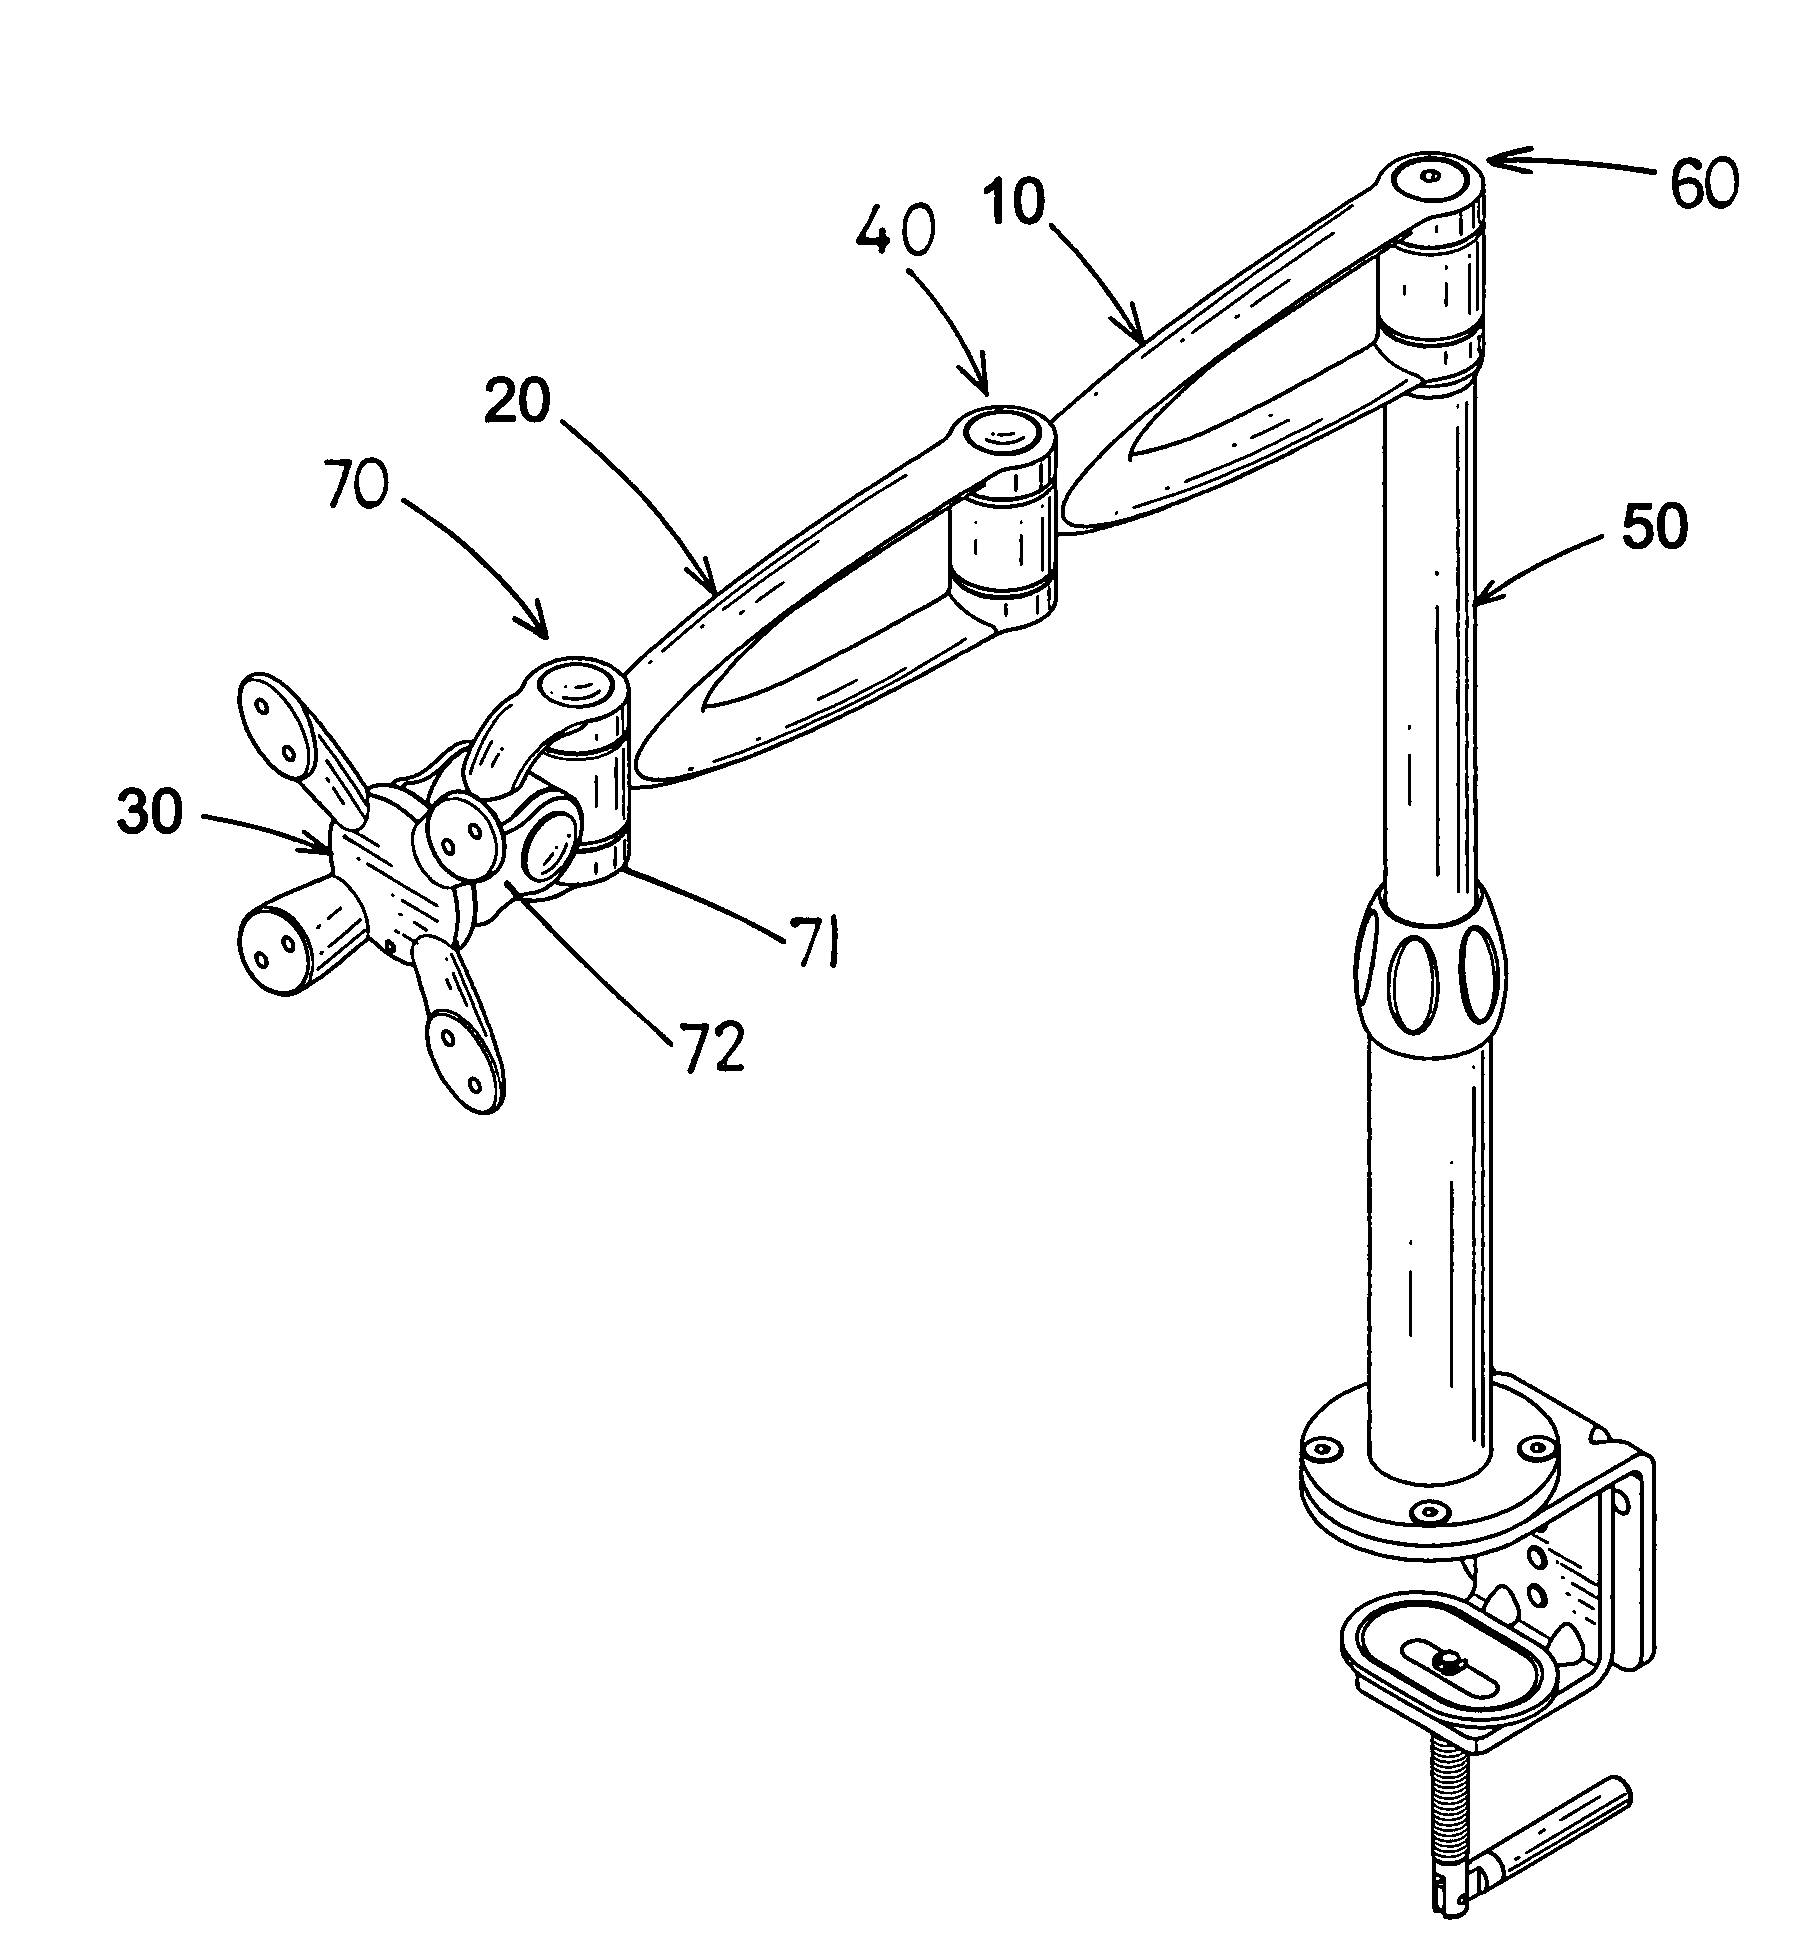 Monitor-holding device